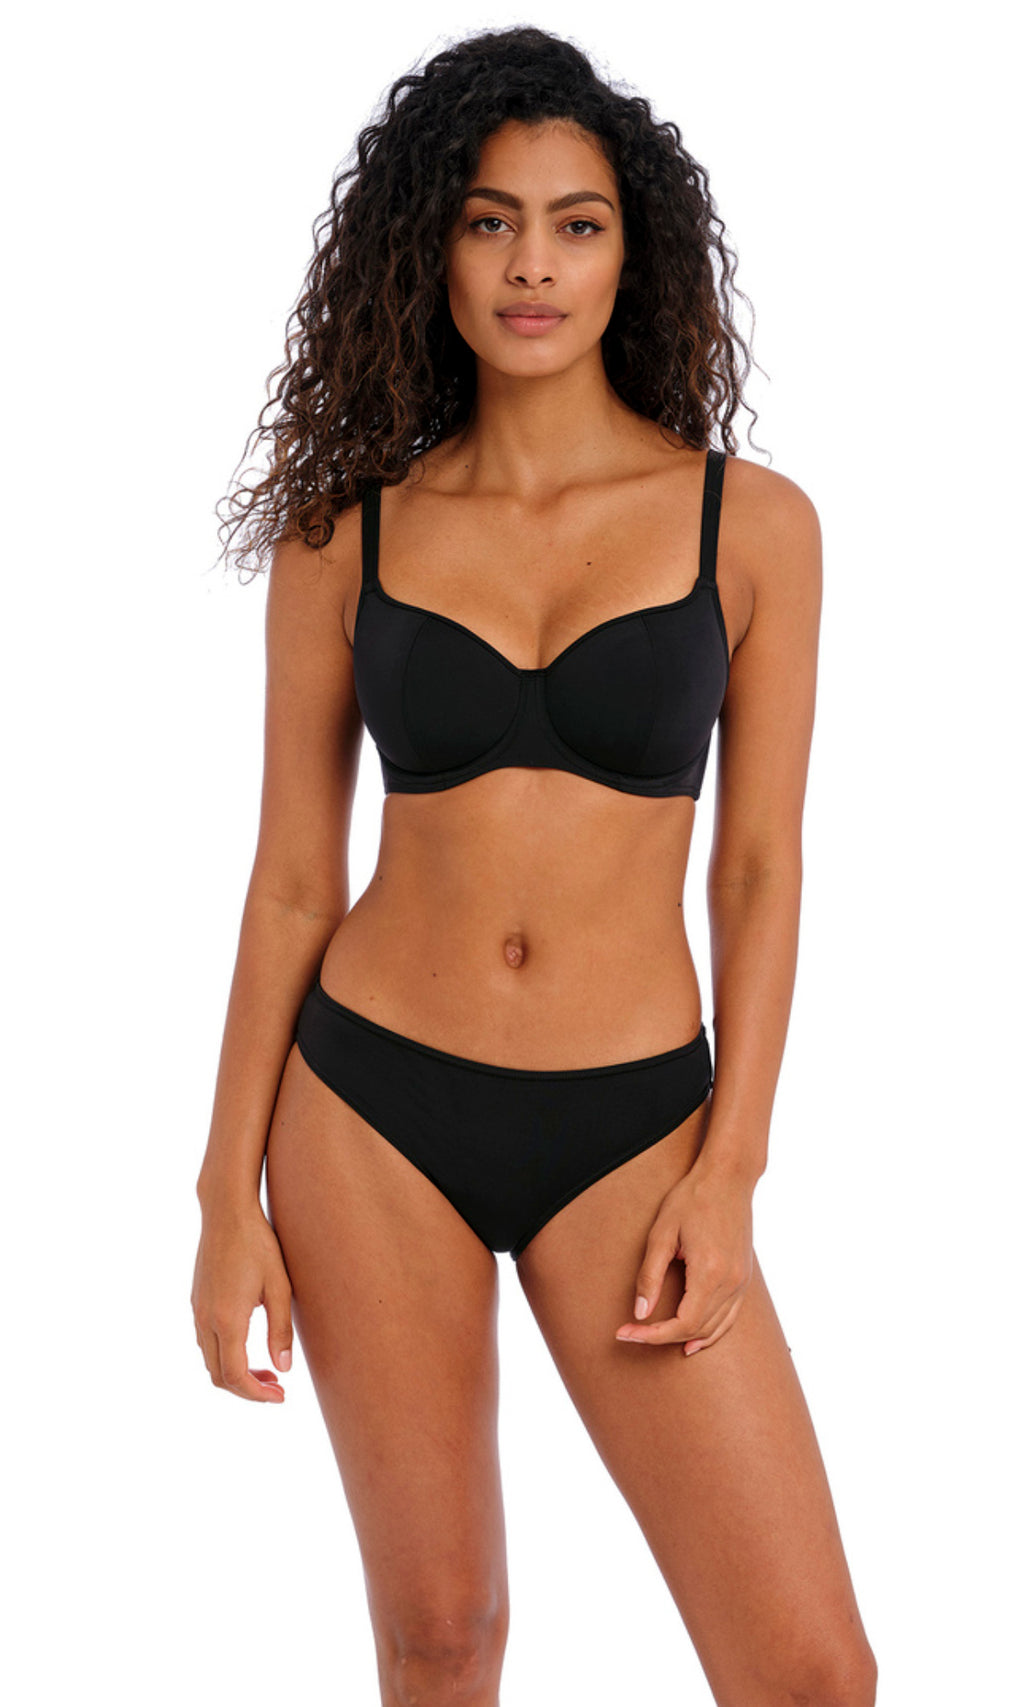 Jewel Cove Plain Black UW Sweetheart Bikini Top, Special Order D Cup to HH Cup